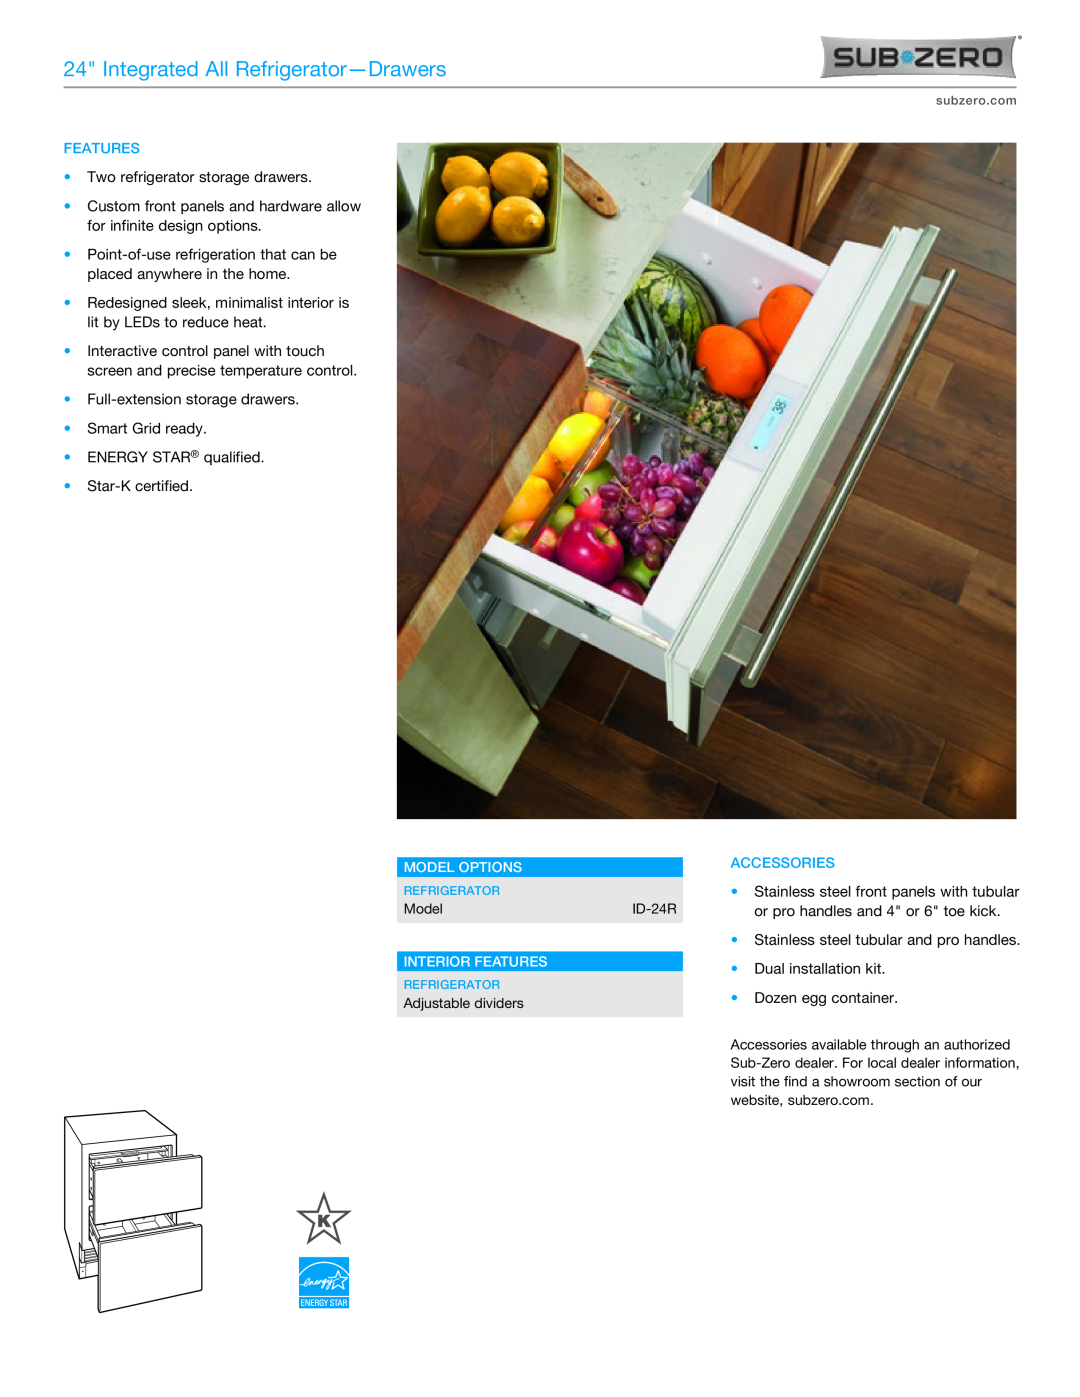 Sub-Zero ID-24R manual Integrated All Refrigerator-Drawers, Accessories, Model Options, Interior Features 